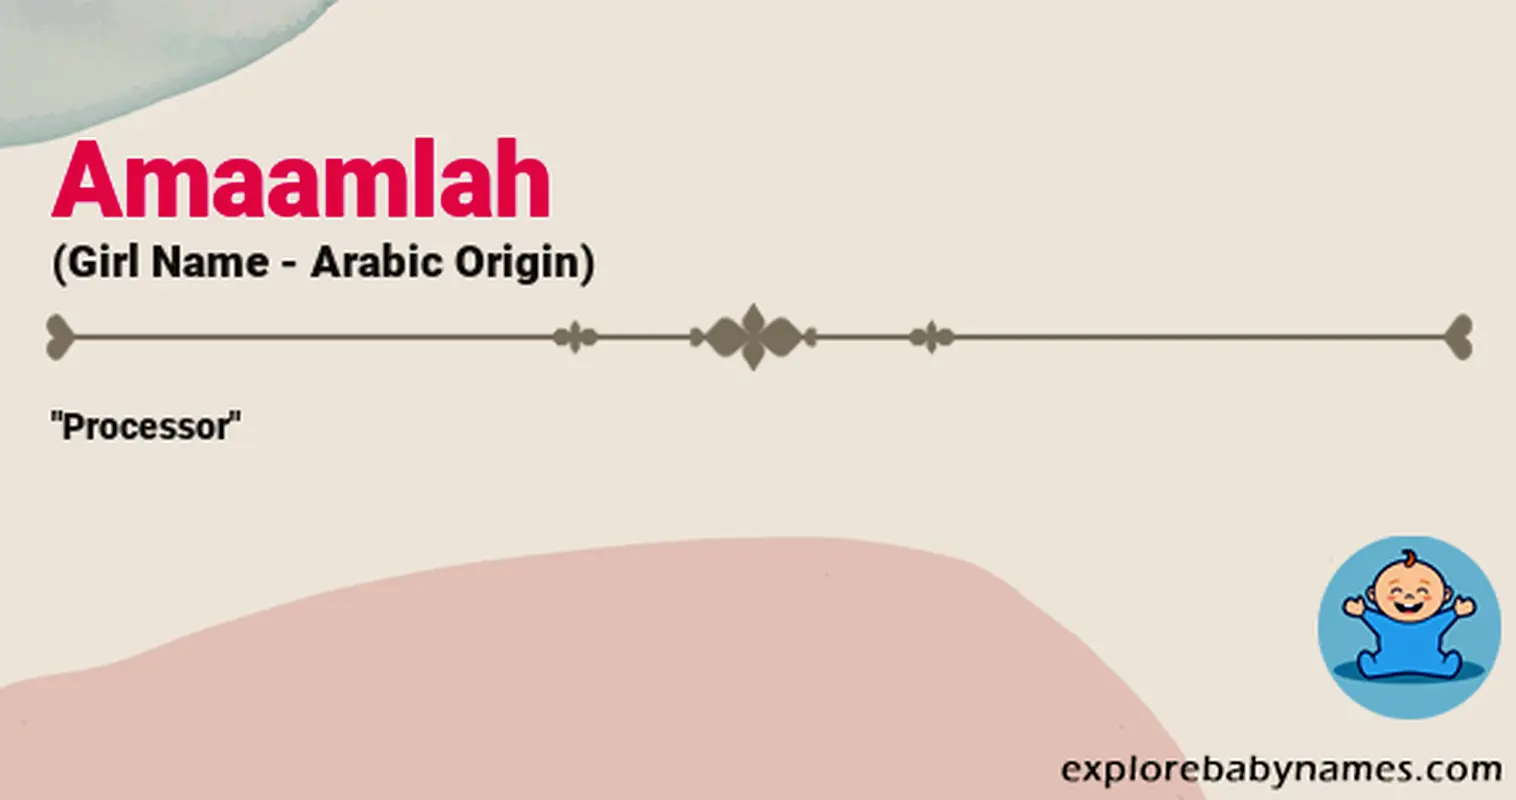 Meaning of Amaamlah